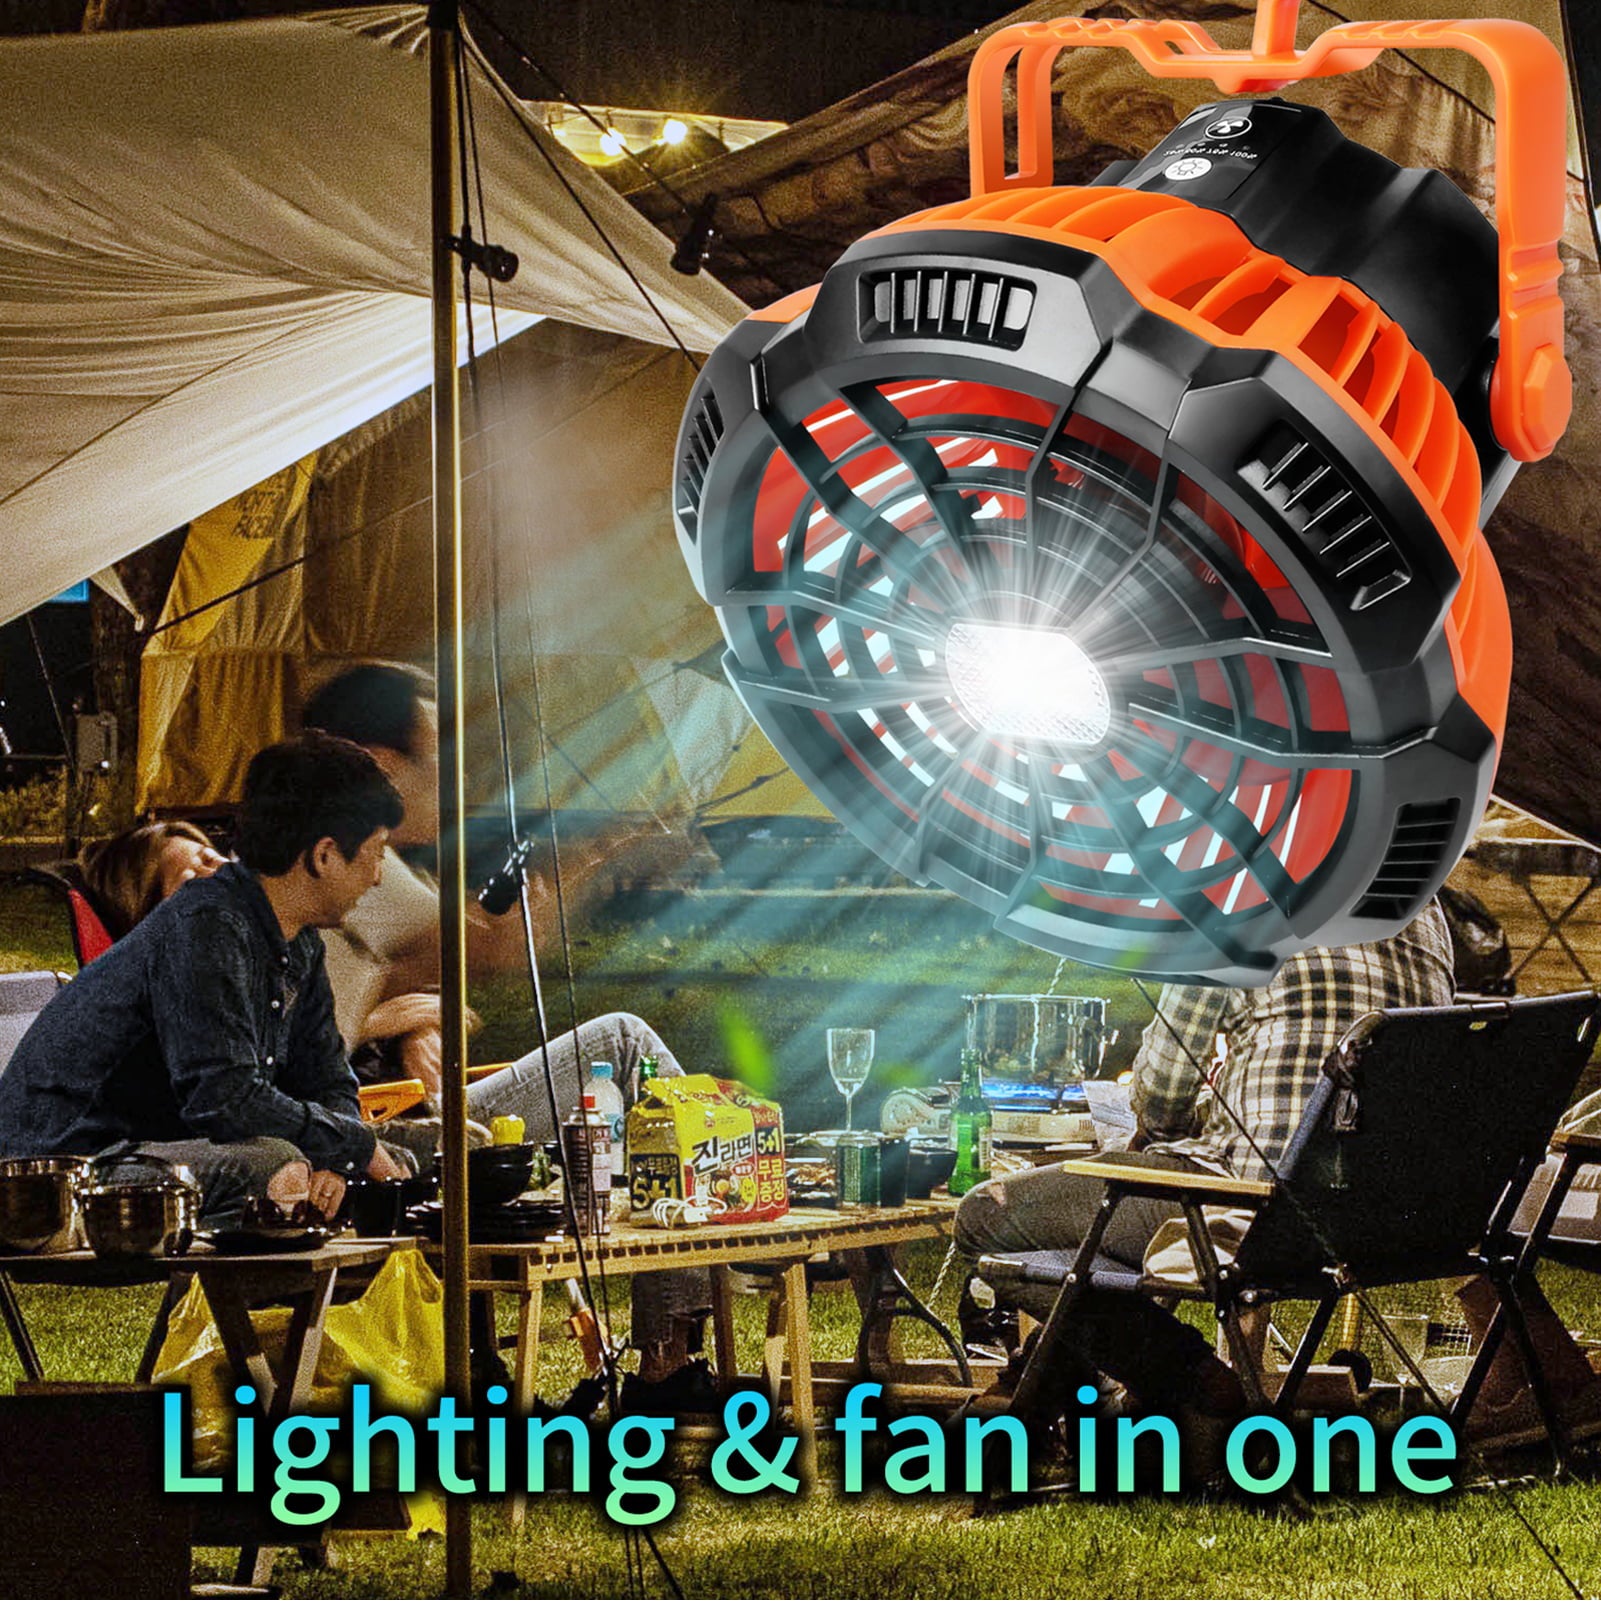 Camping Tent Fan with LED Lantern, Camp Fan Rechargeable, 5200mAh Battery Hanging 360° Adjustment Power Bank Fan with Remote Control for Camping Fishing Outdoor Use